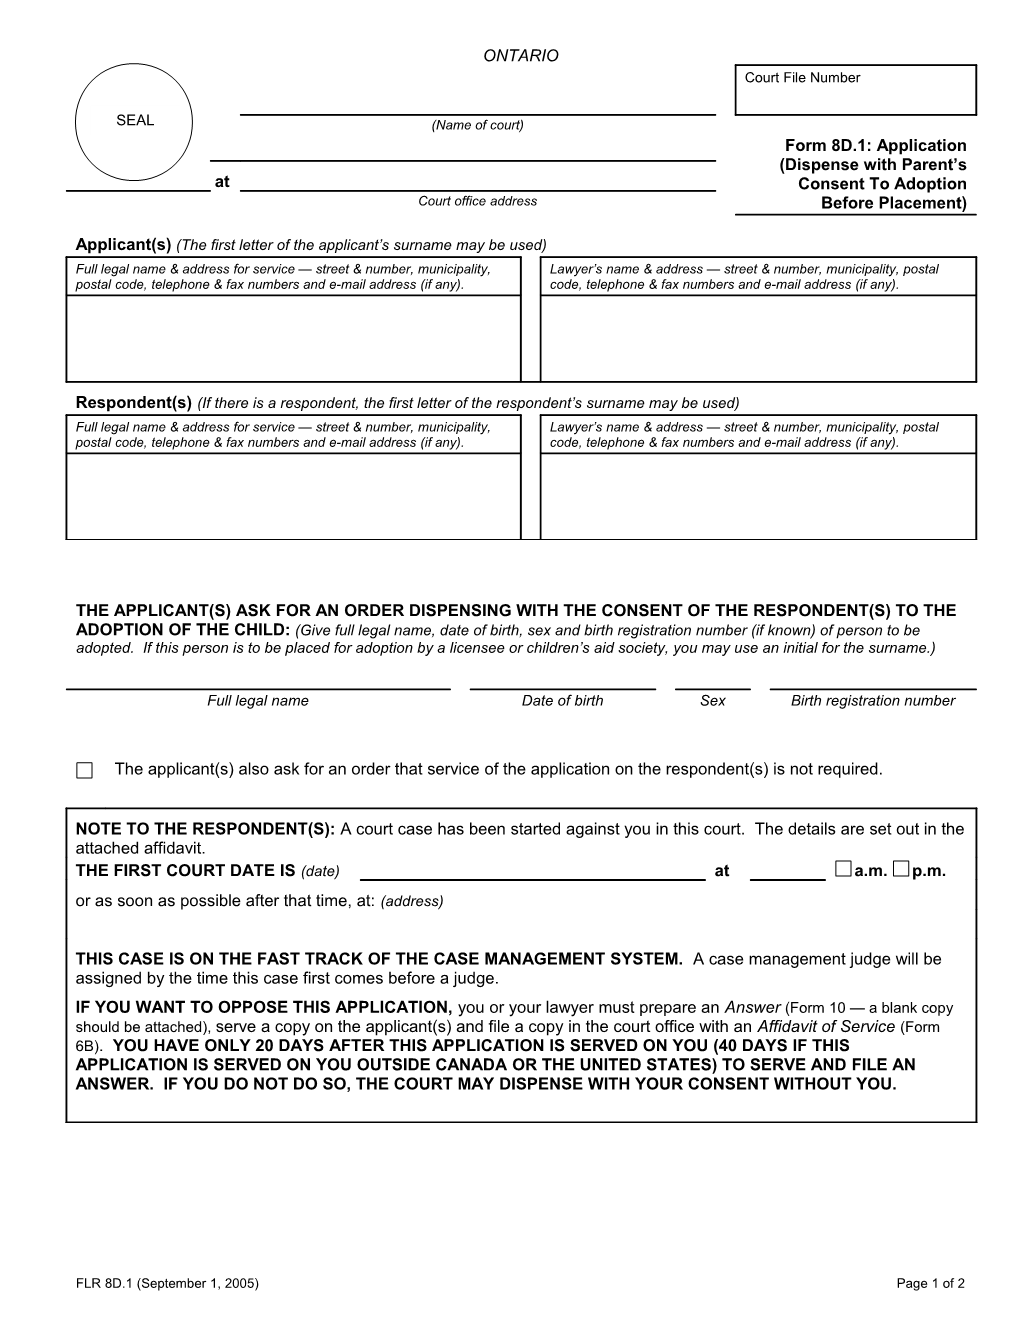 Form 8D.1 Application (Dispense with Parent S Consent to Adoption Before Placement)